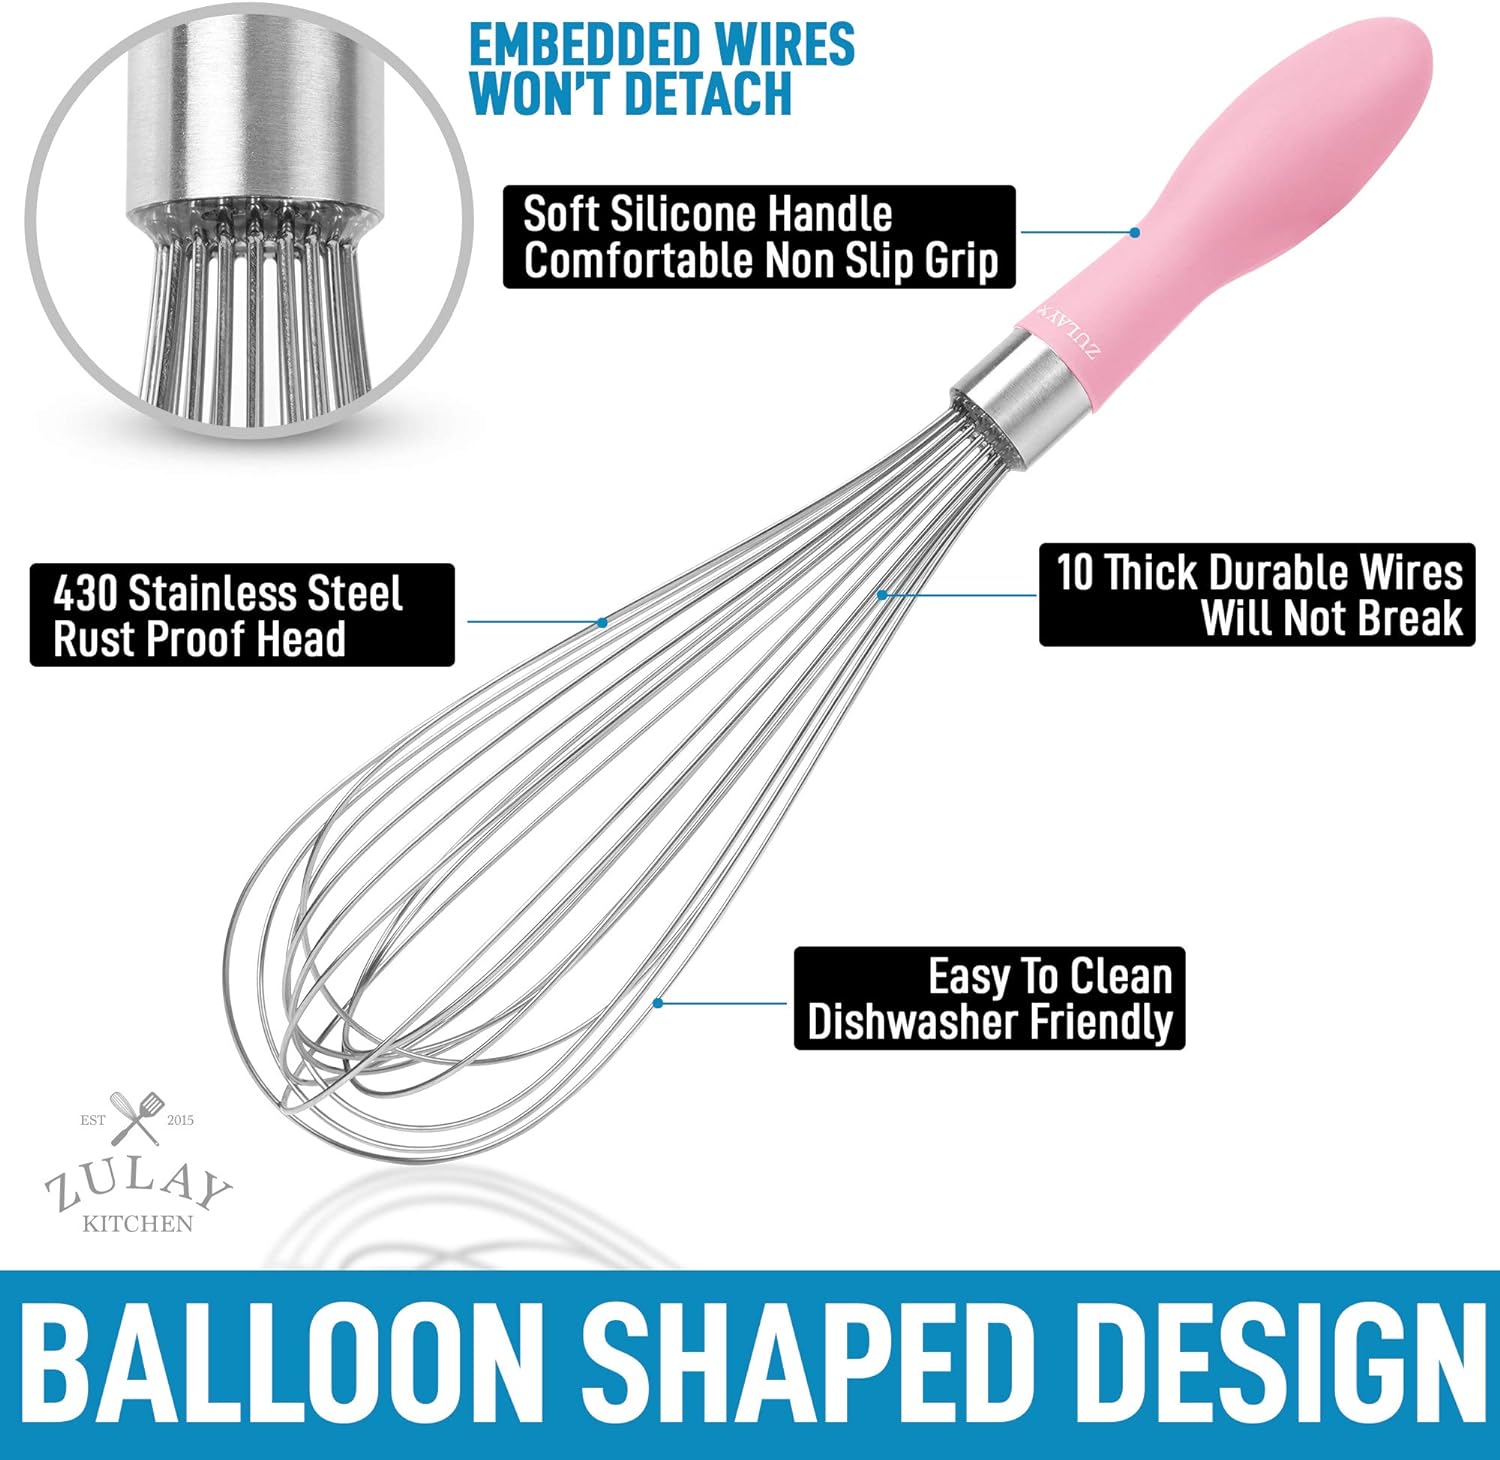 10 Balloon Whisk with Wooden Handle